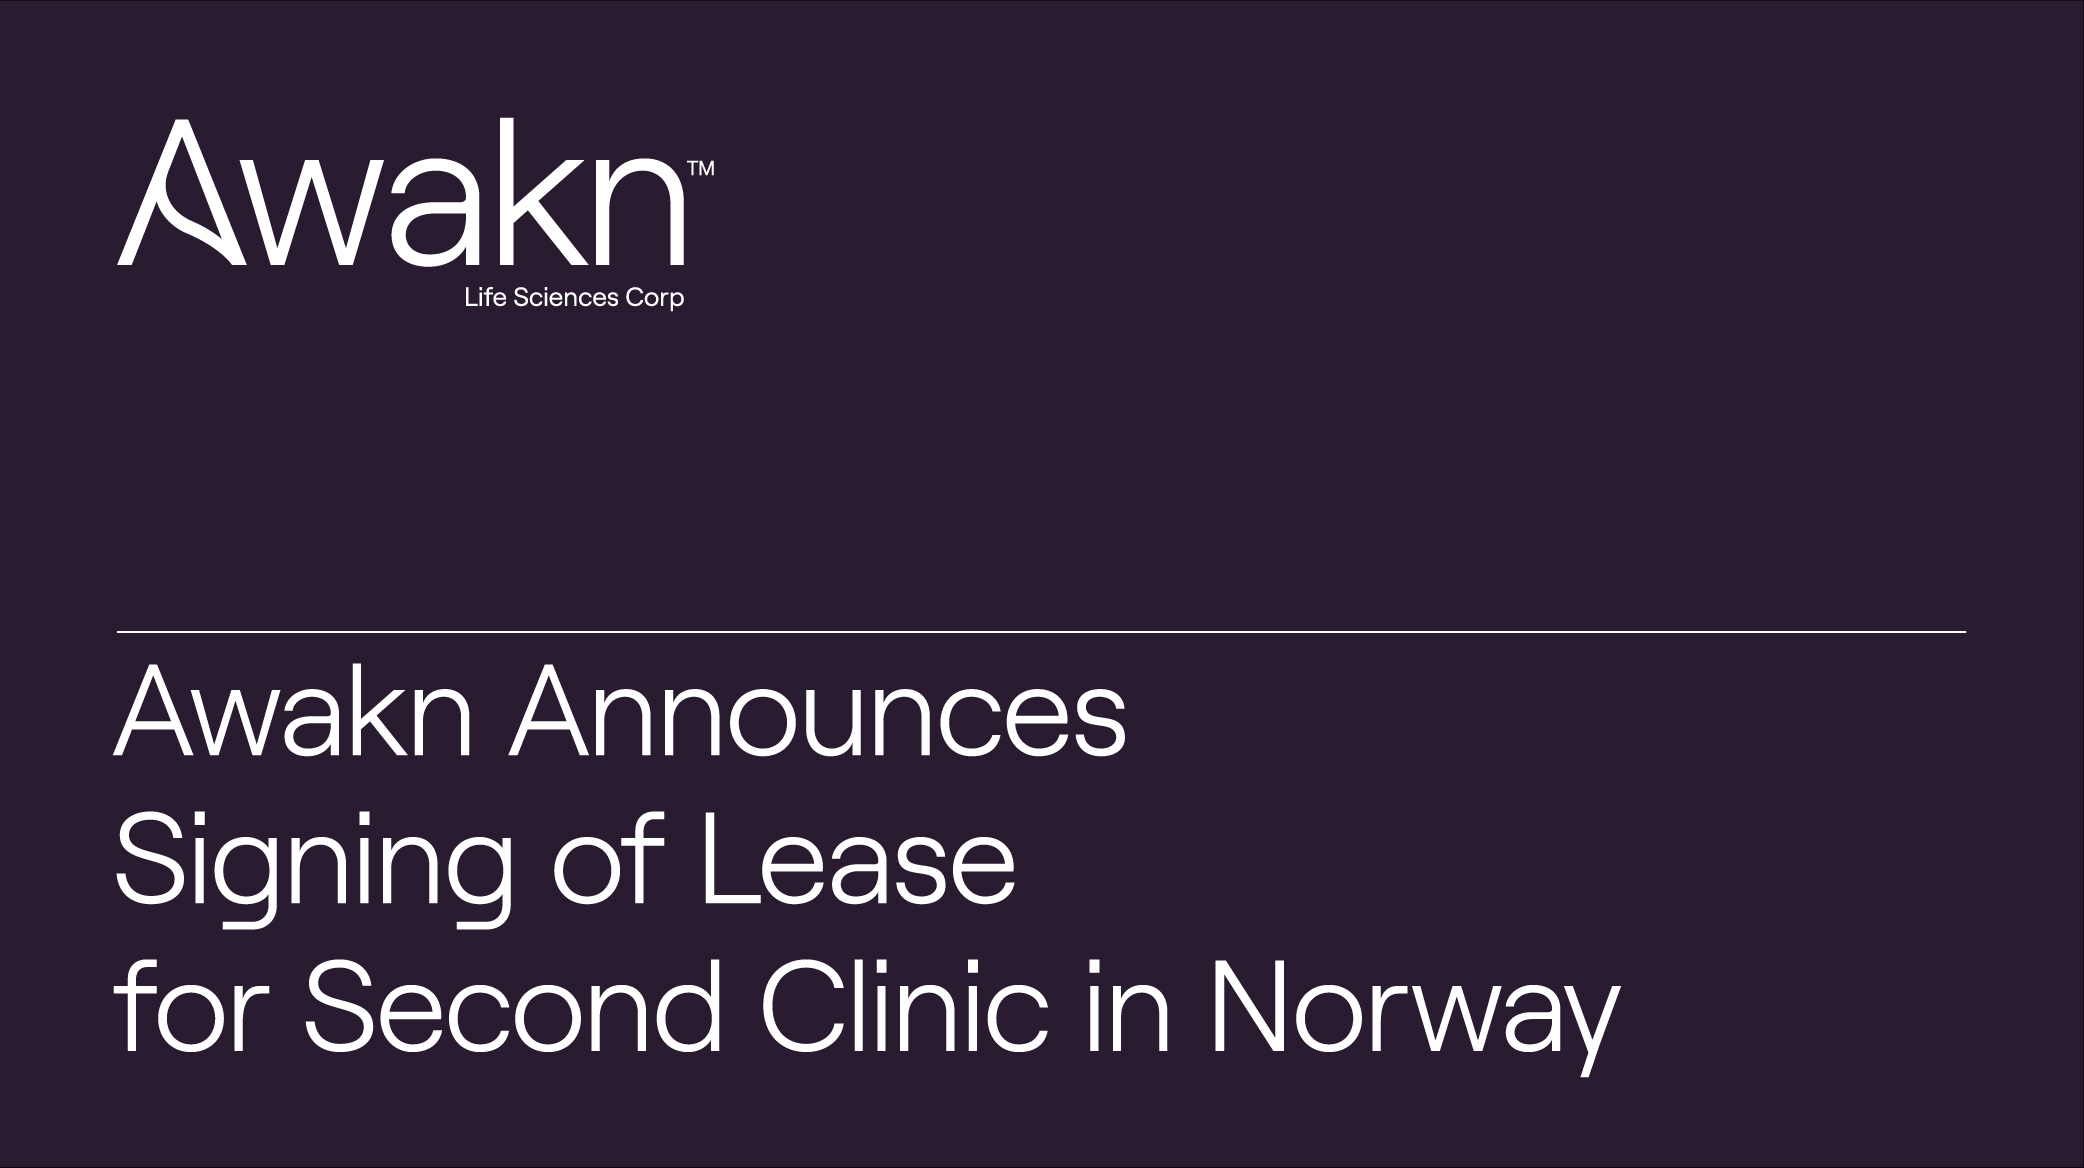 Awakn Announces Signing of Lease for Second Clinic in Norway